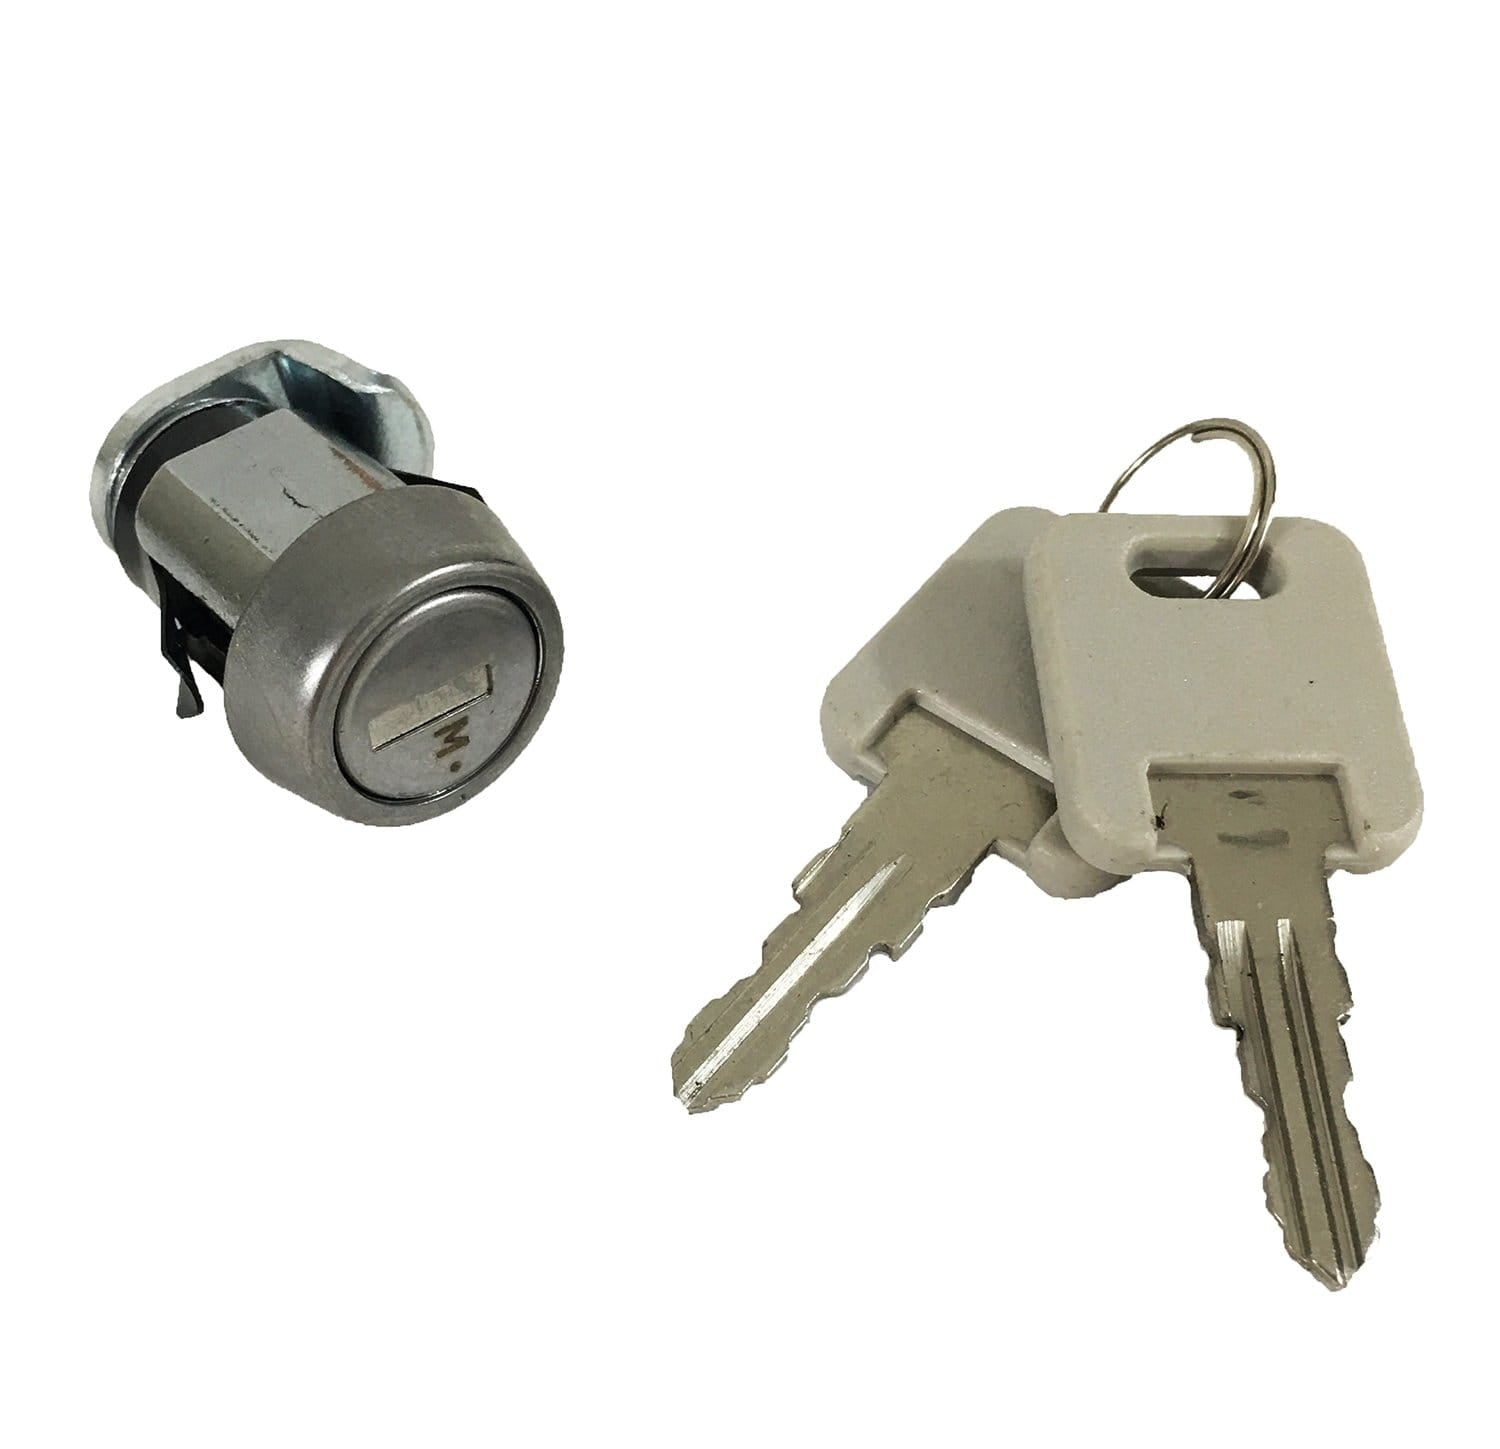 Thetford B&B Molders 94153 Replacement Hatch Lock and Key